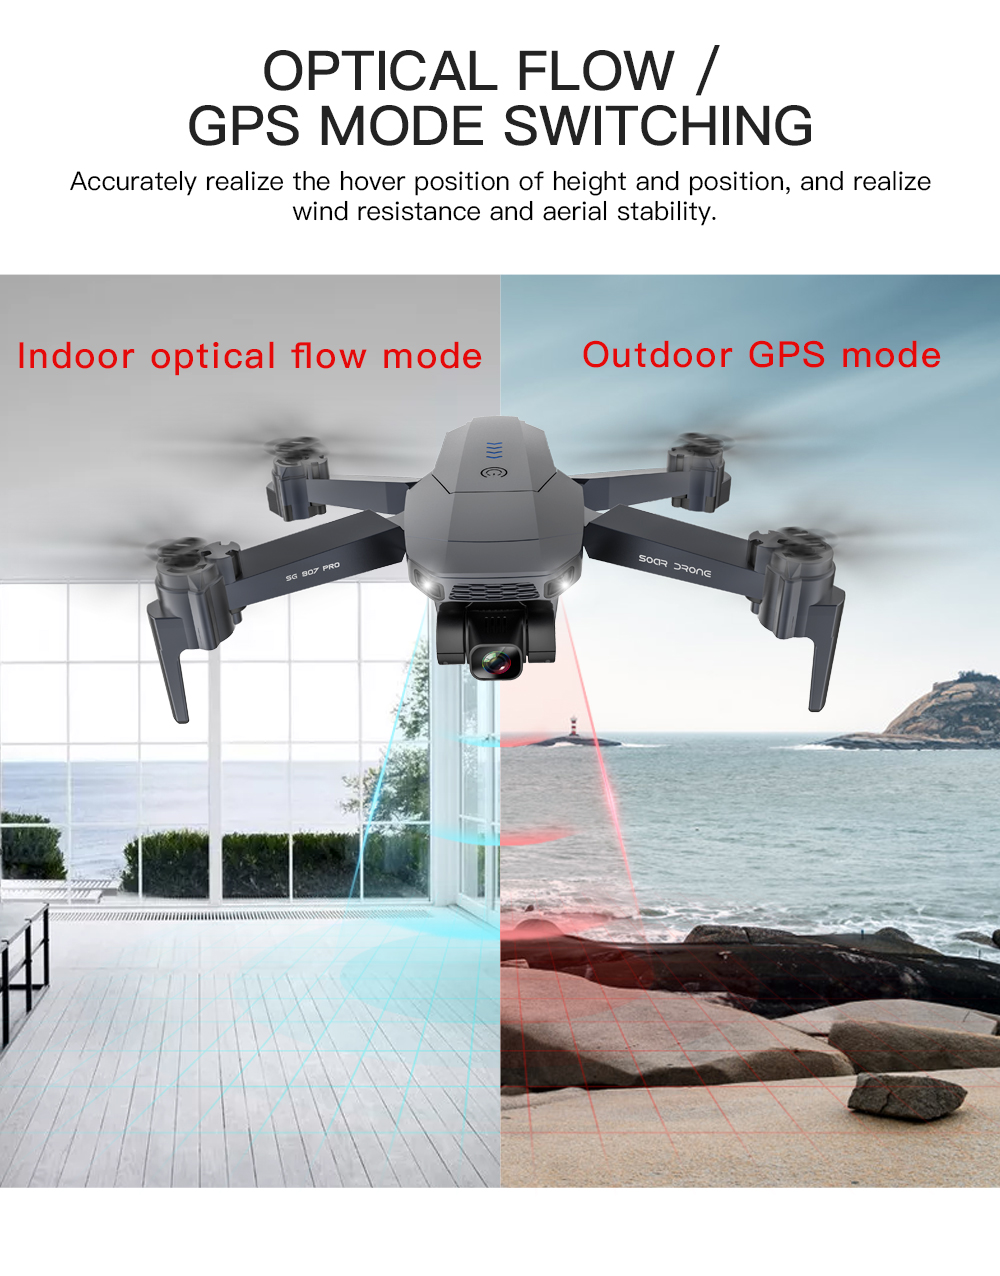 ZLL SG907 Pro 5G WIFI FPV GPS With 4K HD Dual Camera Two-axis Gimbal Optical Flow Positioning Foldable RC Drone Quadcopter RTF 124